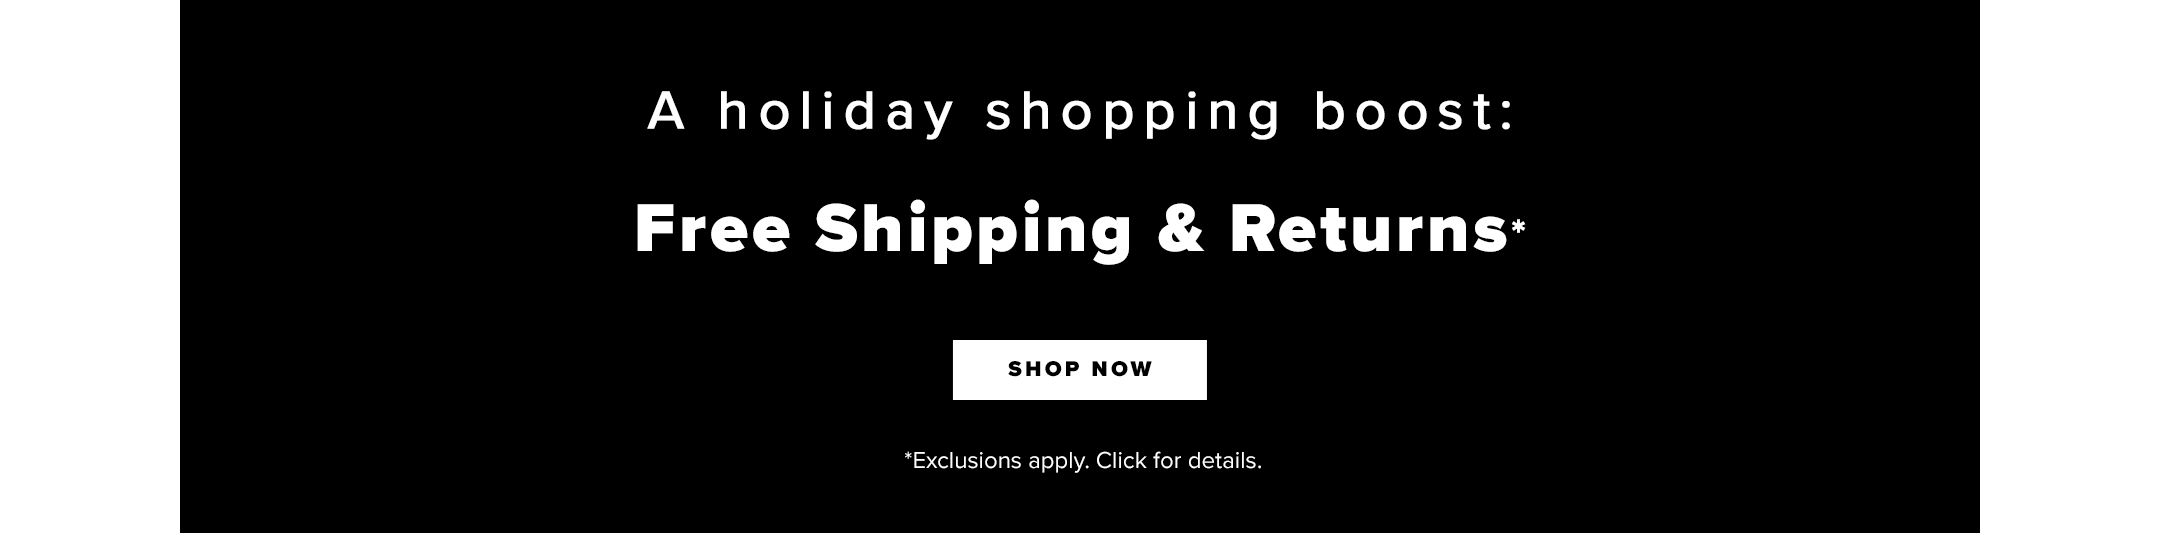 Shop A holiday shopping boost:

Free Shipping + Returns*

[shop now]